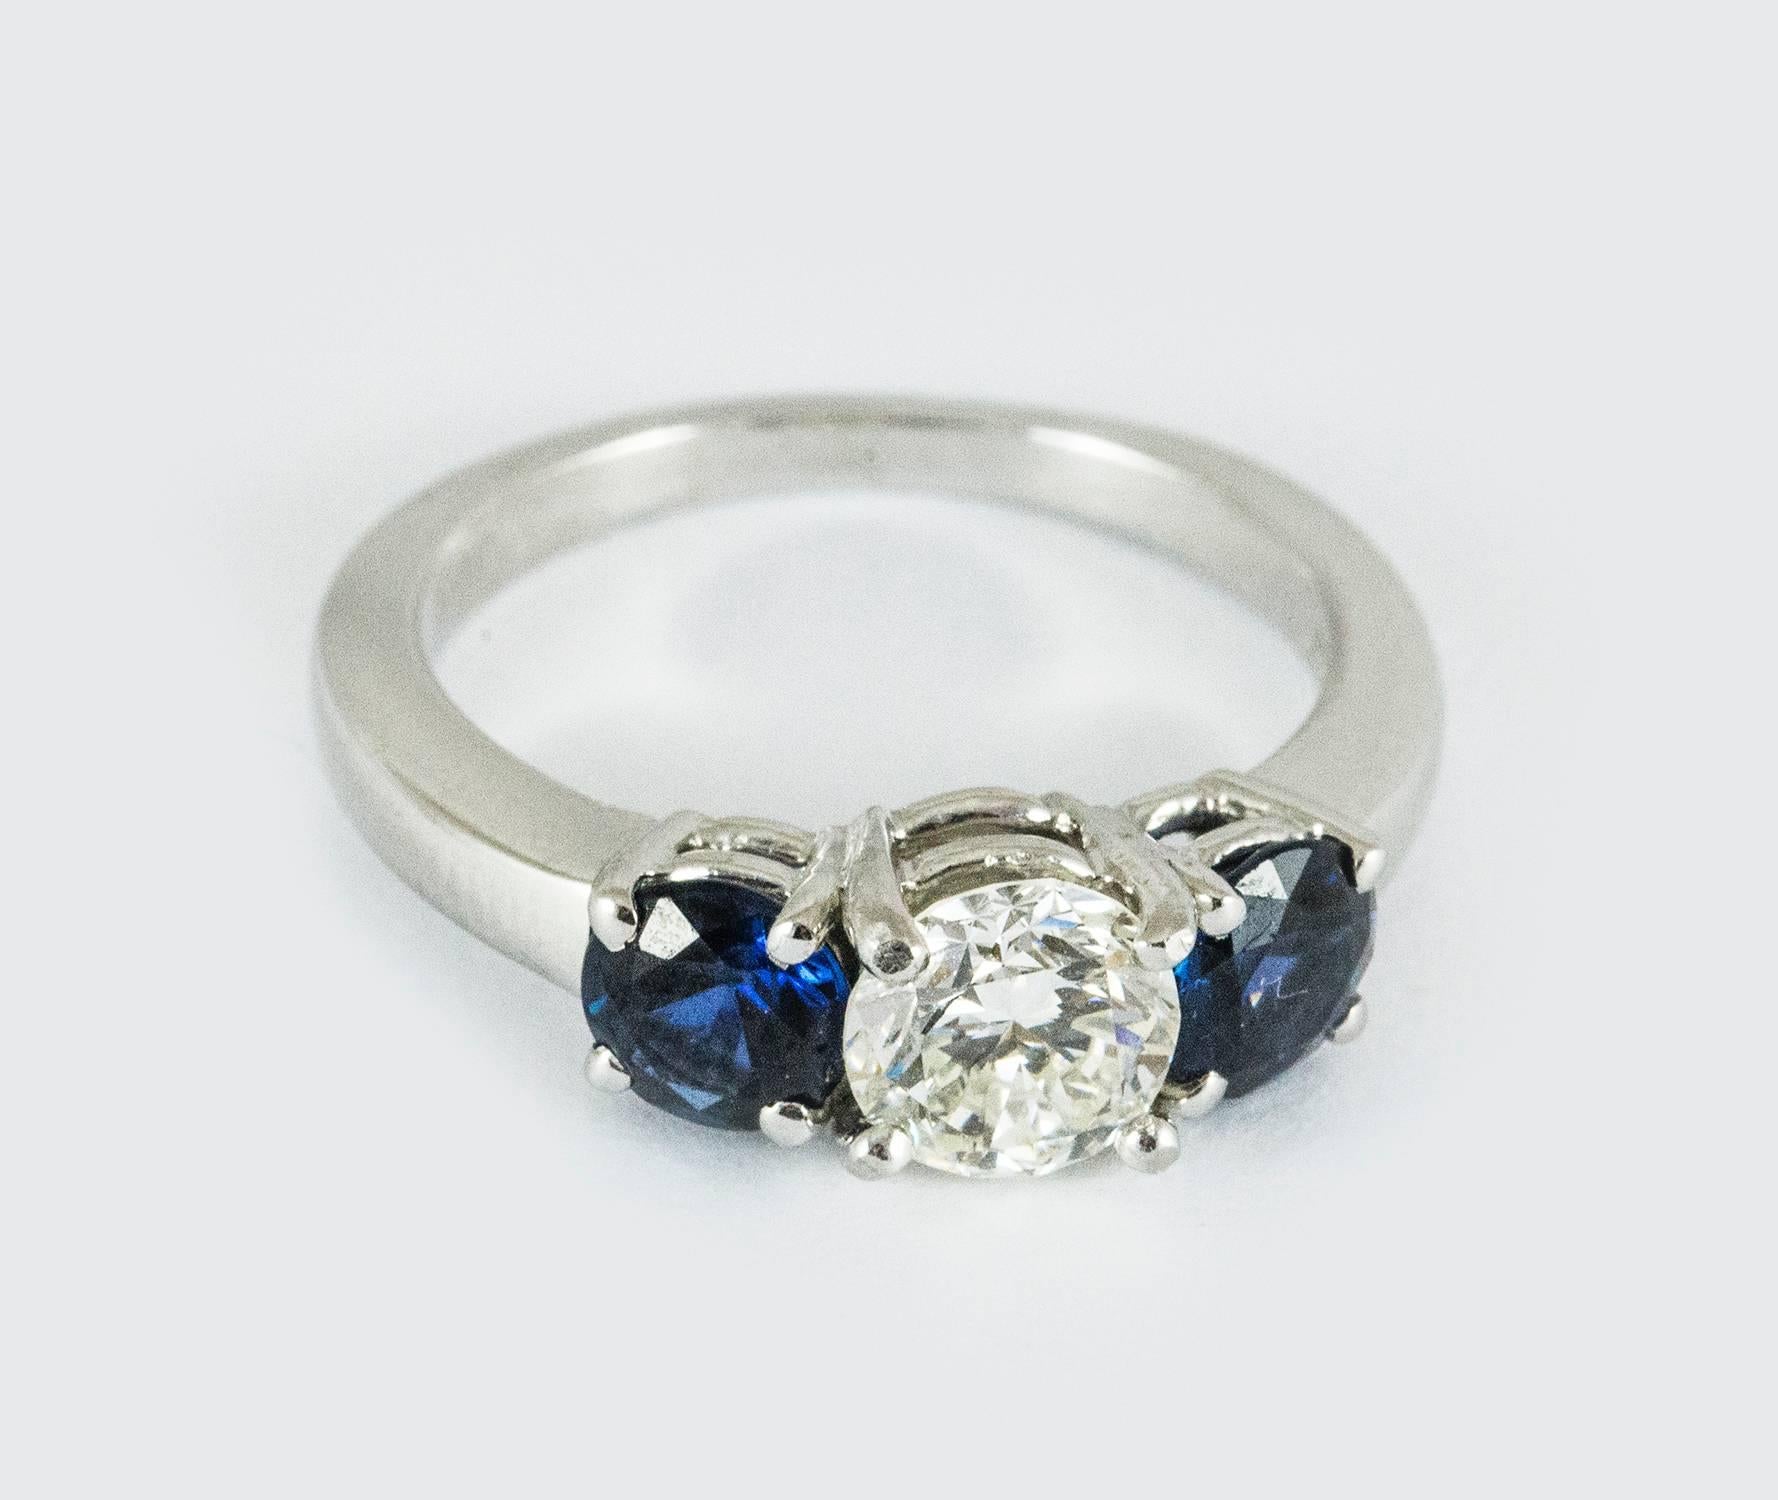 A classic three stone diamond and sapphire ring set in platinum. The central diamond weighs .83 (I colour, VS2 clarity). It is flanked on either side by two blue medium-dark toned sapphires. This ring is tailored and a classic. It measures size 5.5